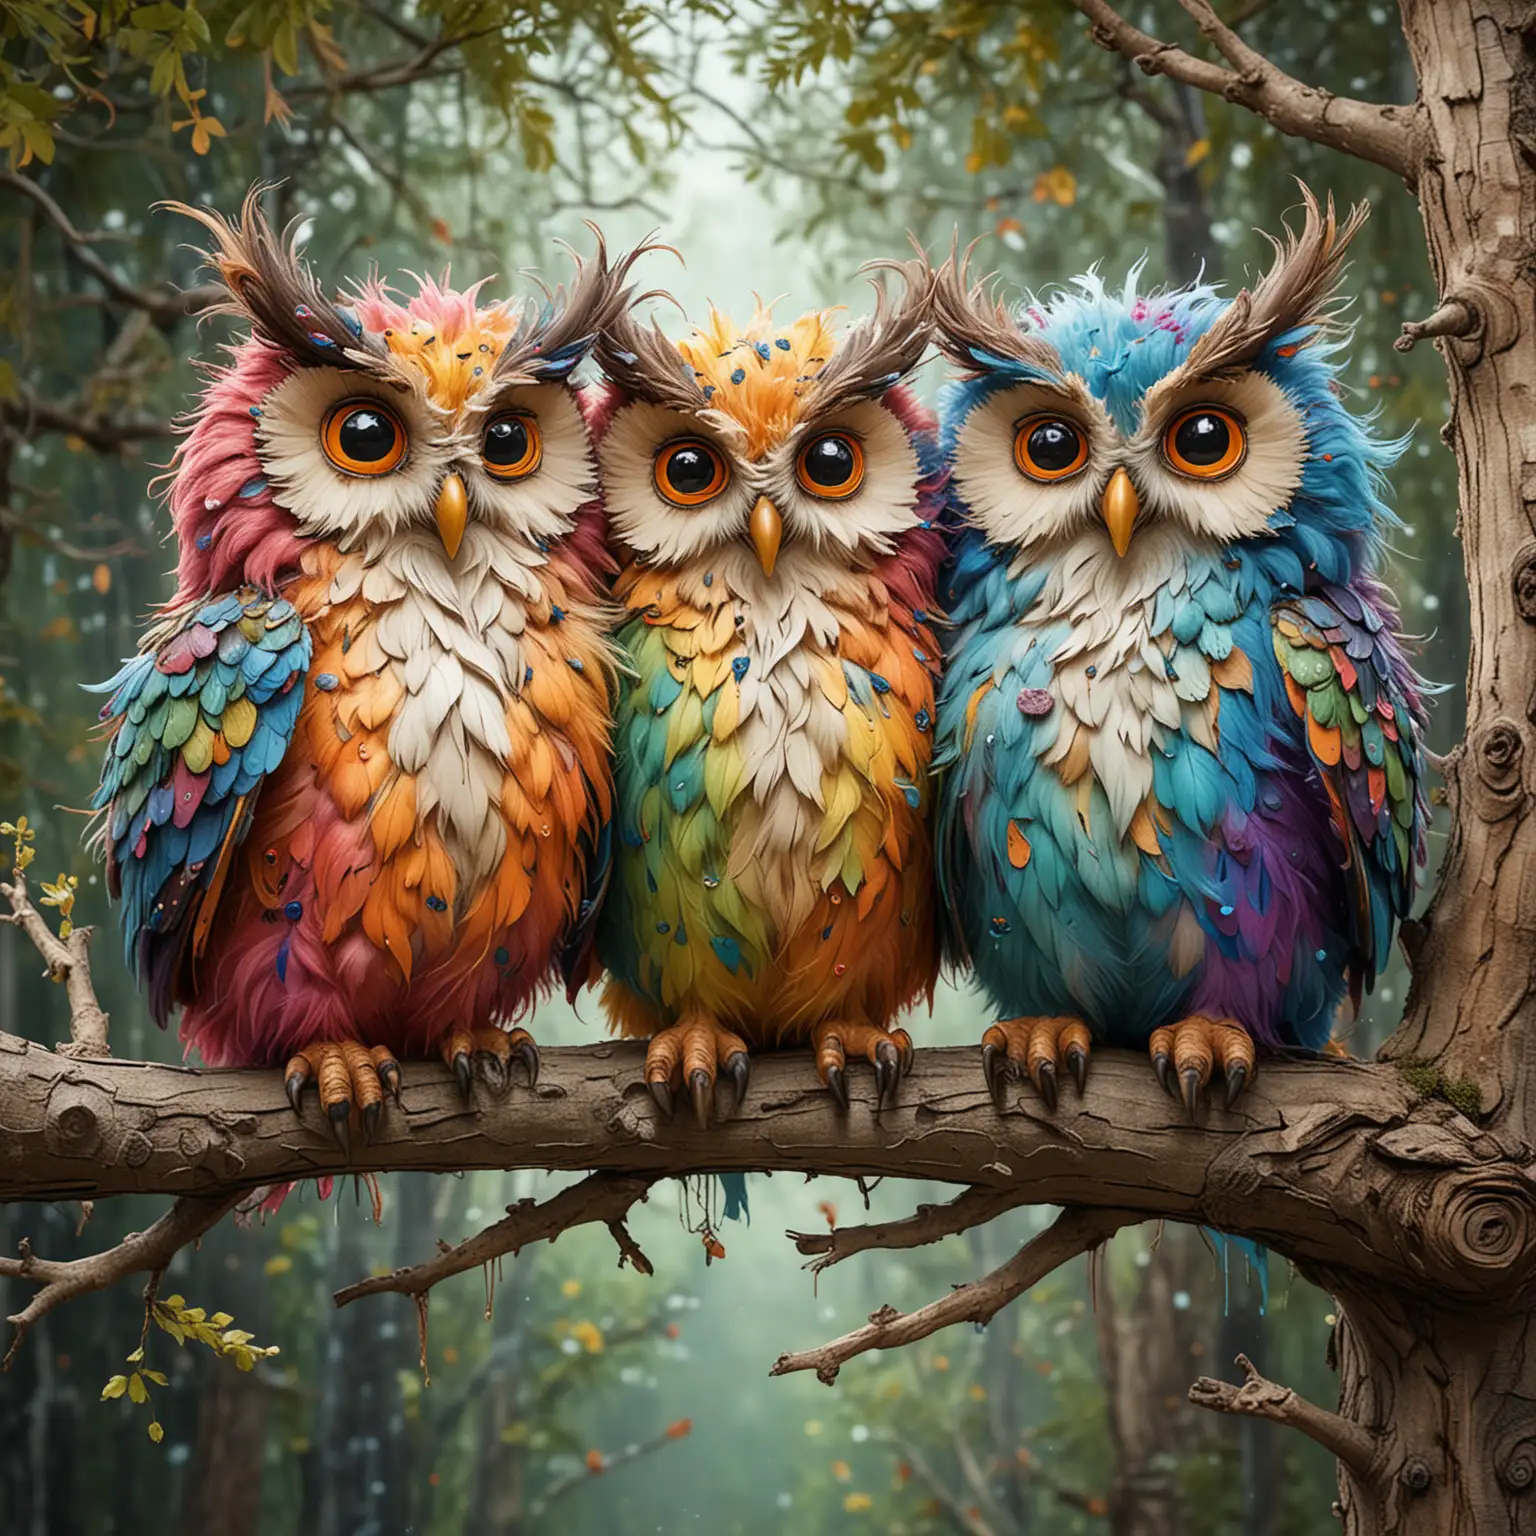 Whimsical Caricature of Colorful Owls Making Silly Faces on Tree Branch